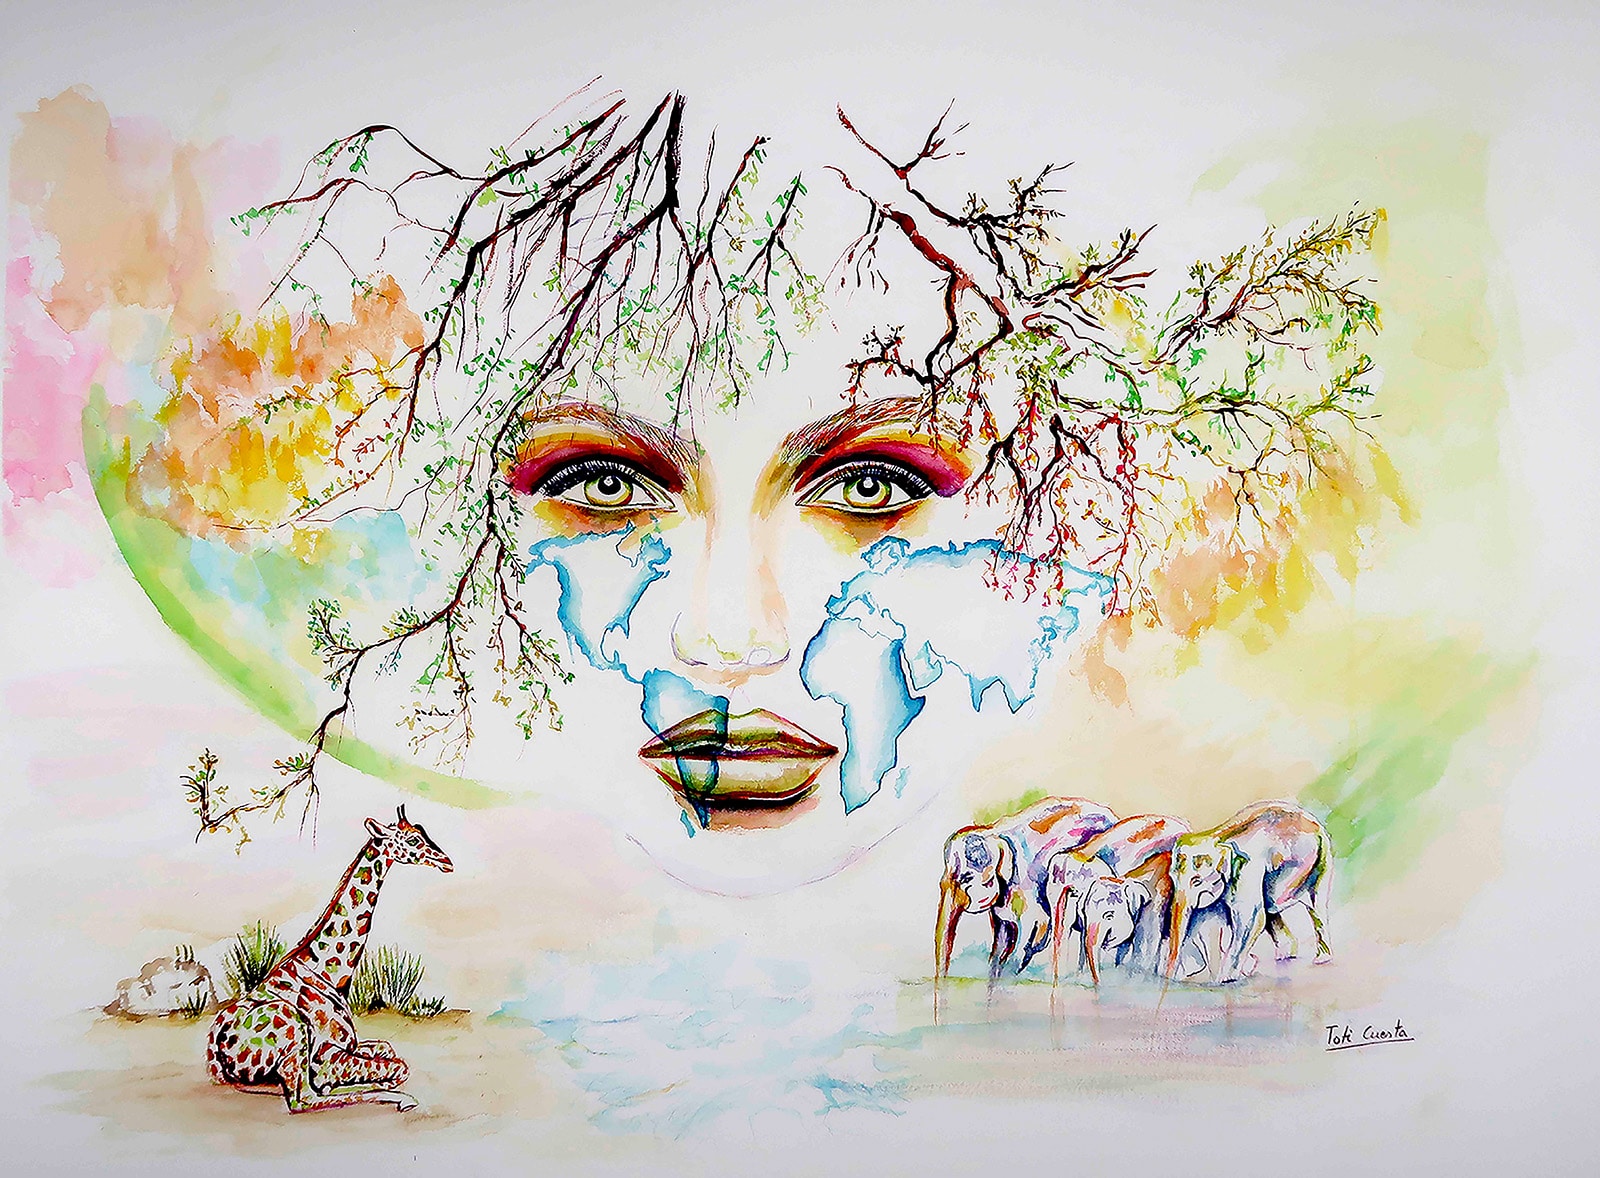 "Mother Earth" Watercolor, 56 x 76 cm by Toti Cuesta